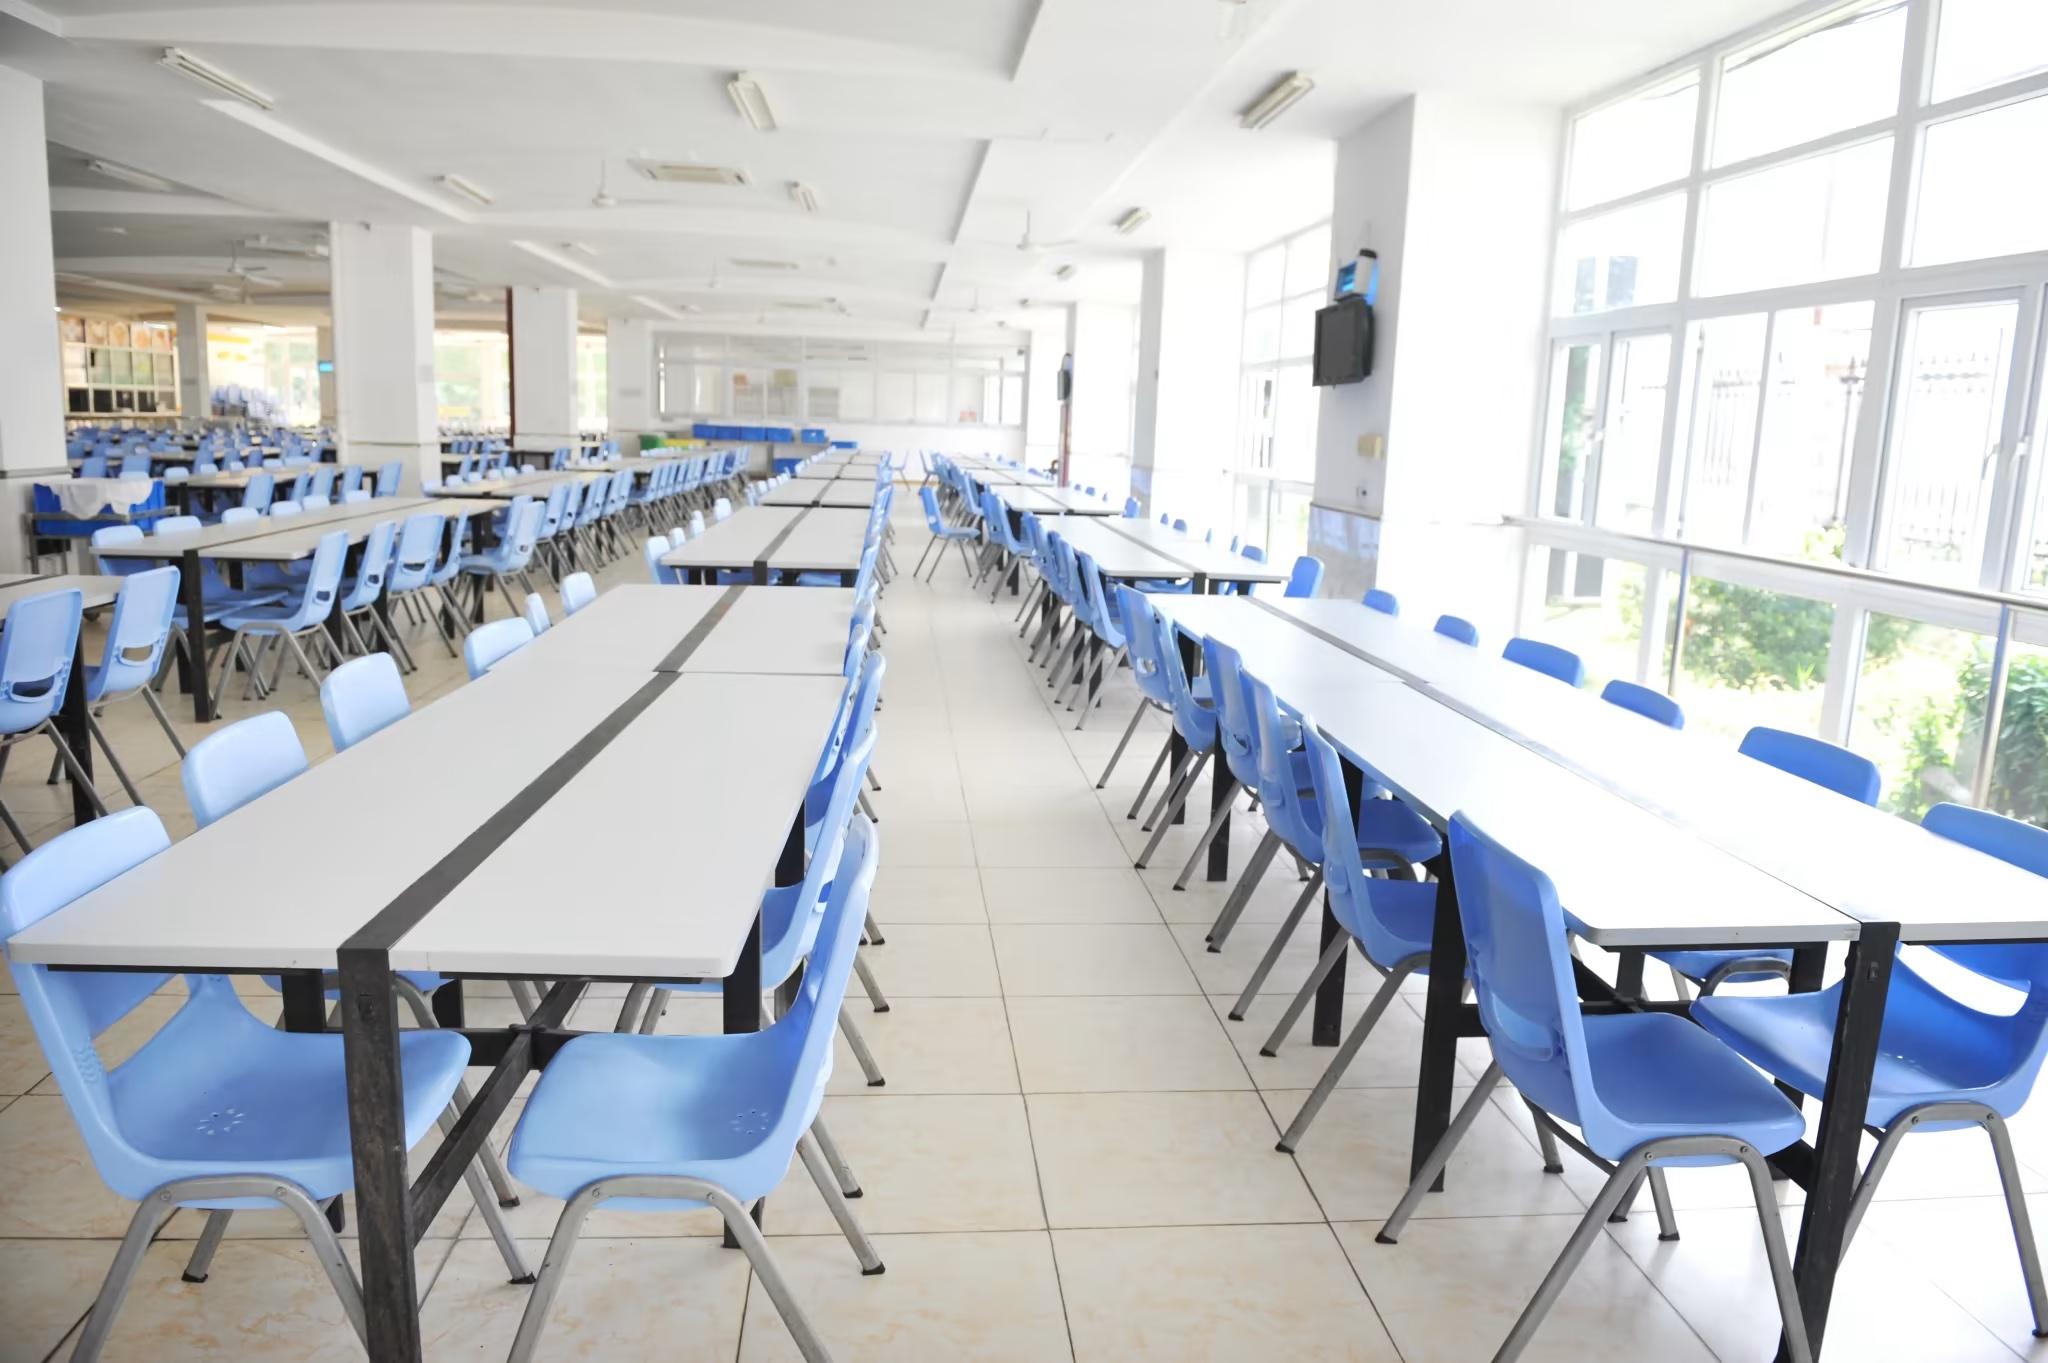 K-12 Education Facility for students